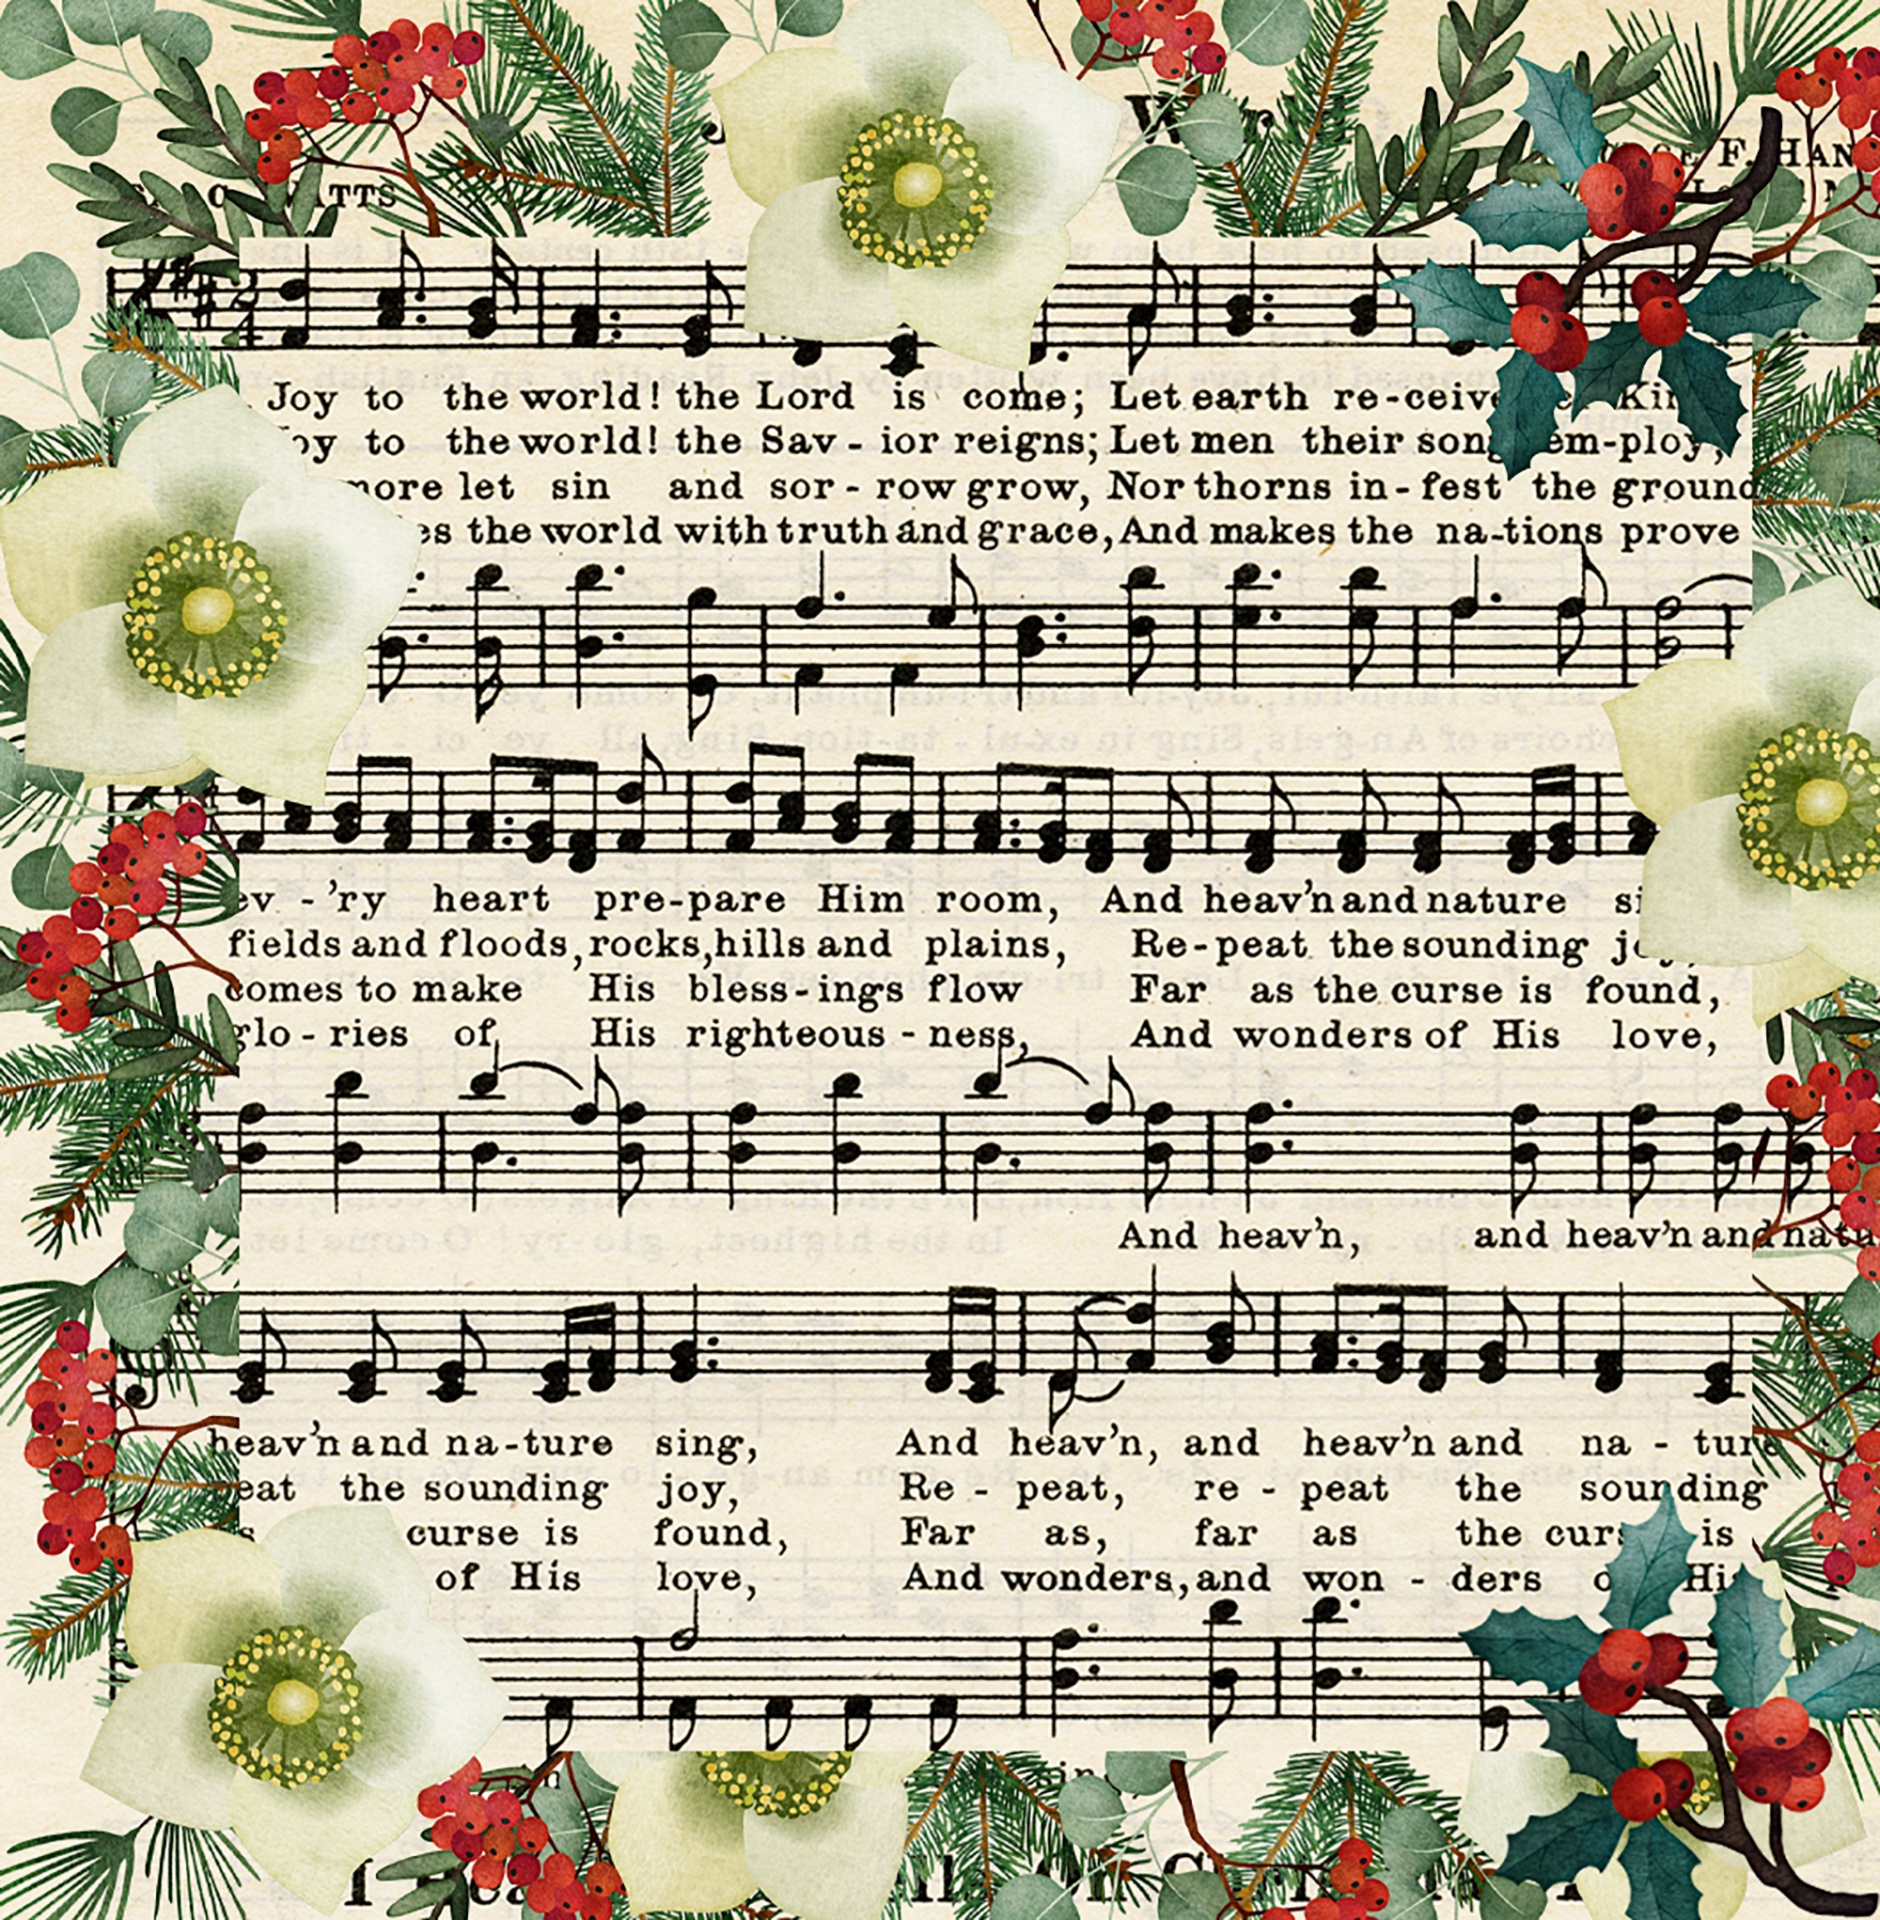 Joy to the world sheet music framed by Christmas flowers